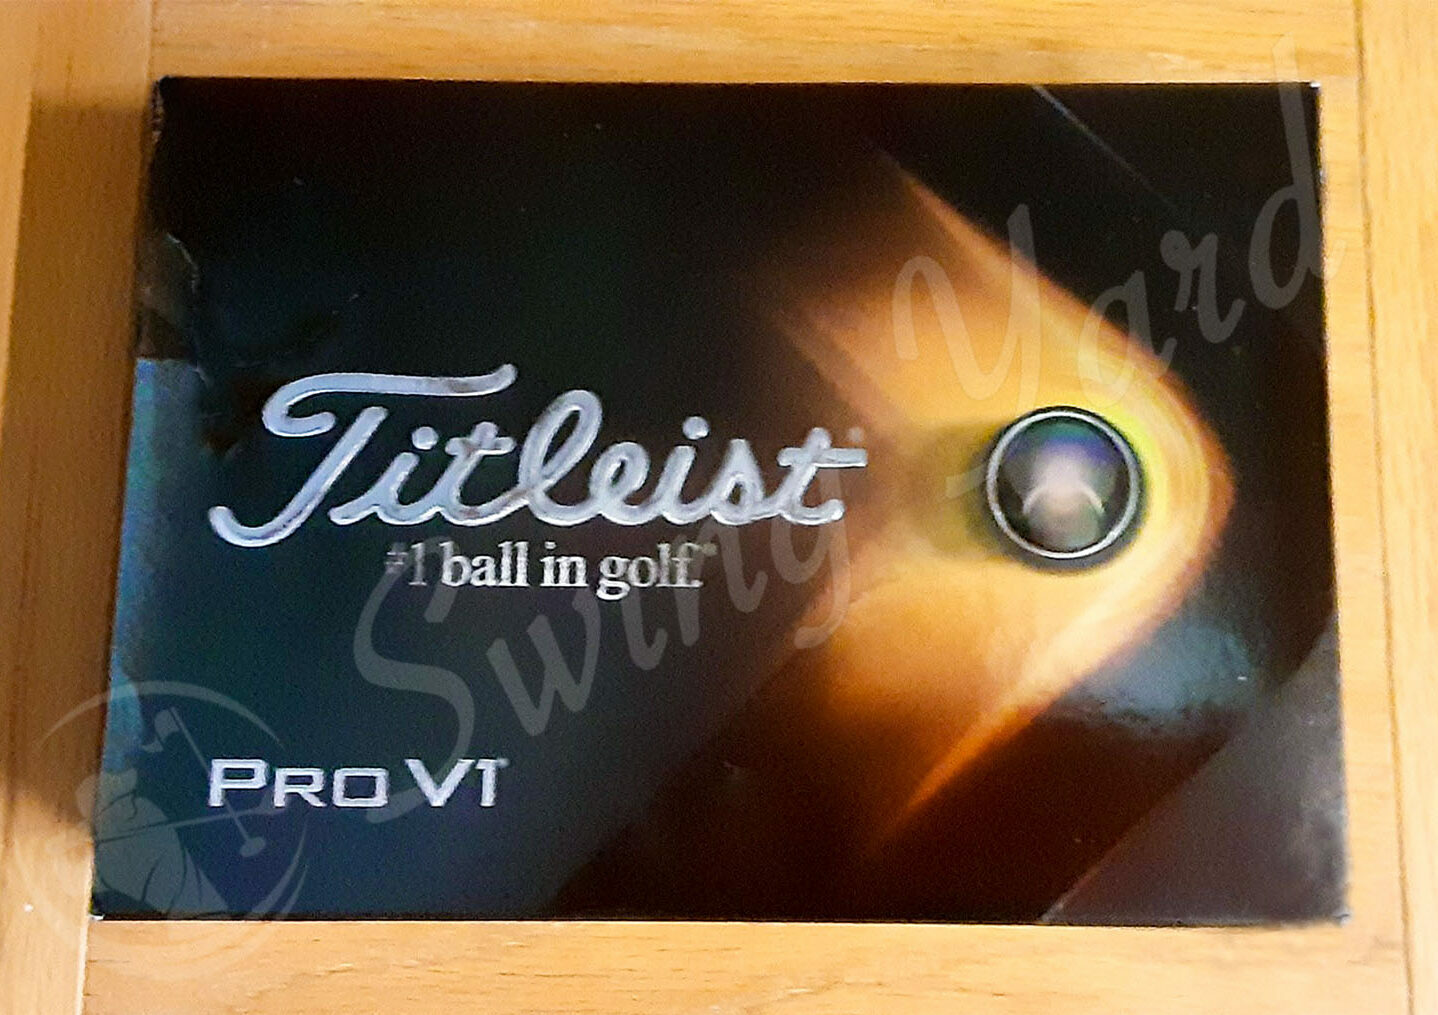 A new Titleist Pro V1 box on the table